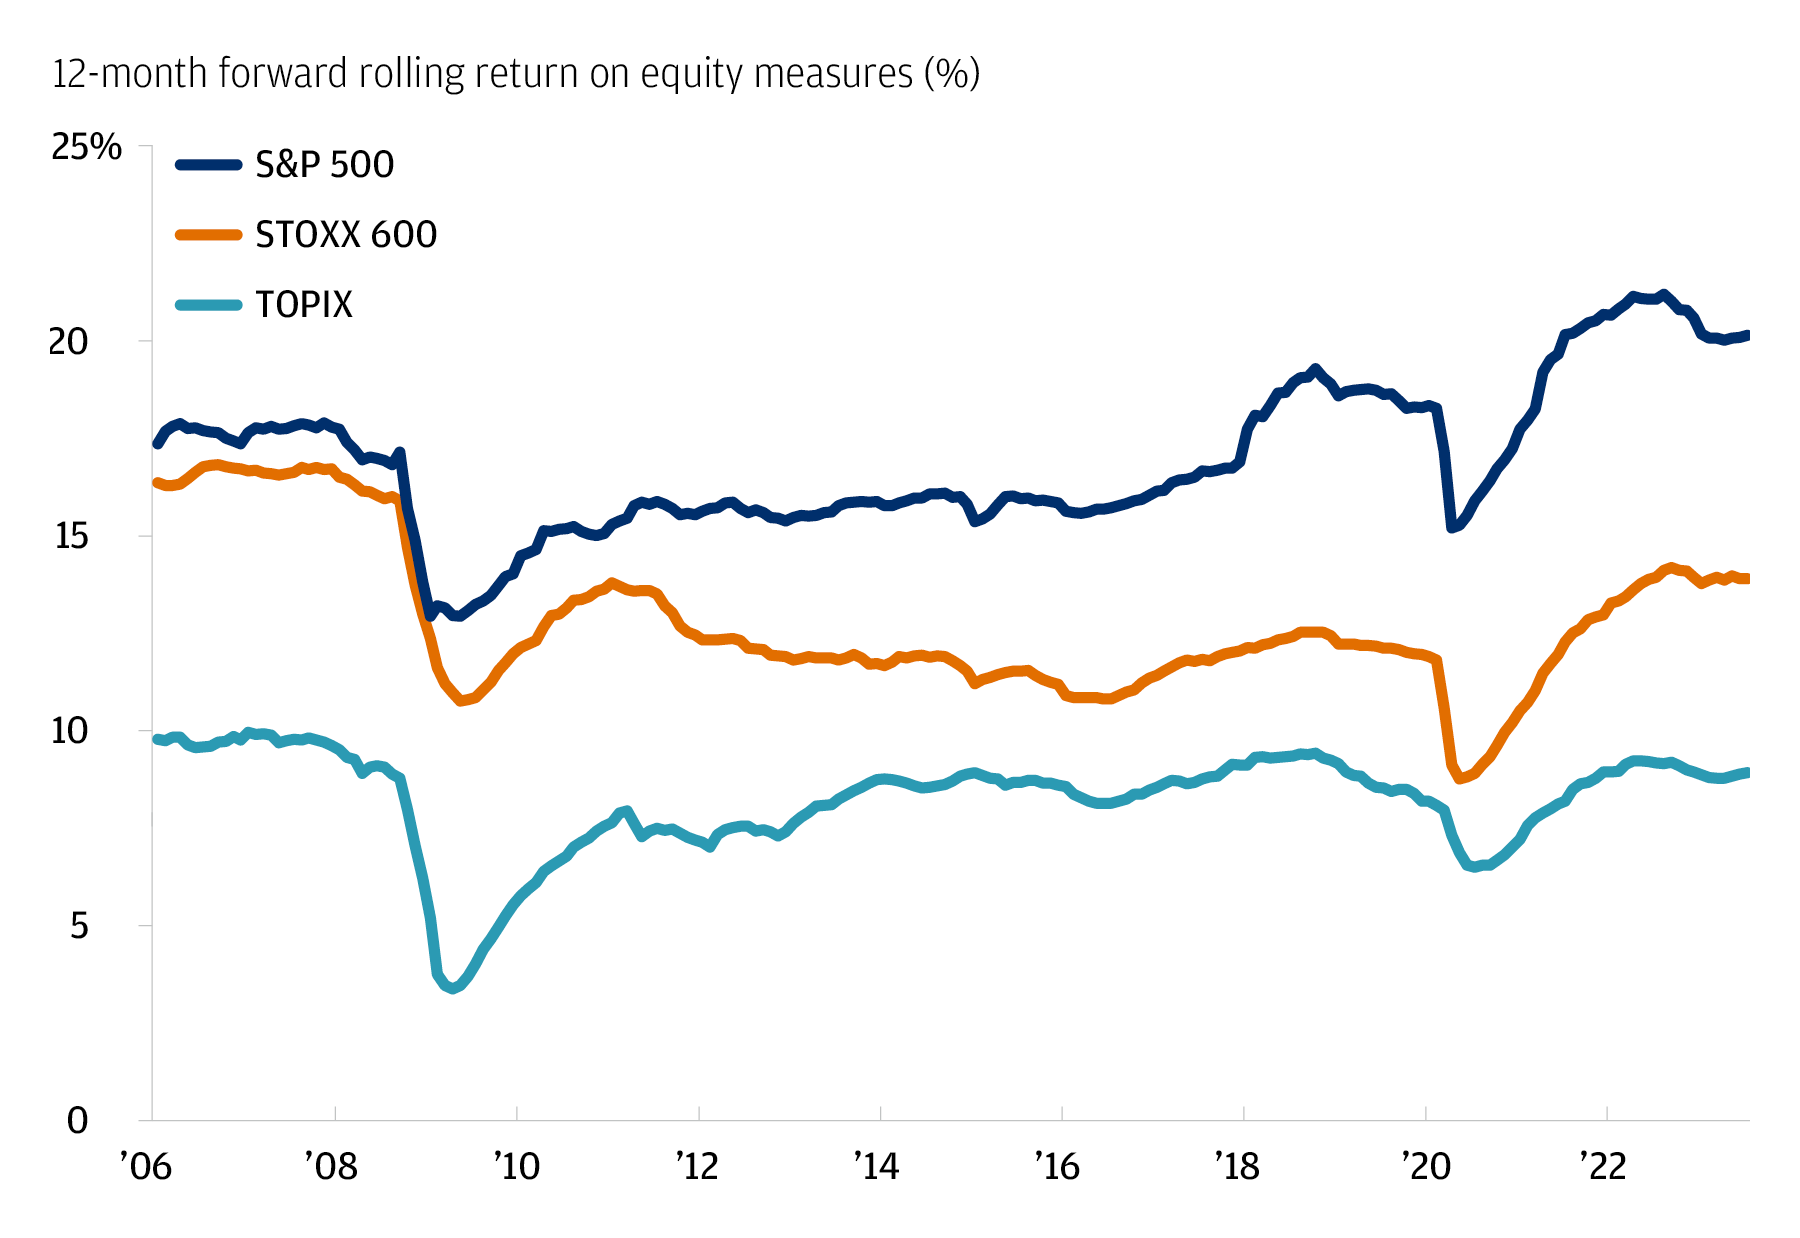 The chart describes the 12-months forward rolling return on equity measures (%).